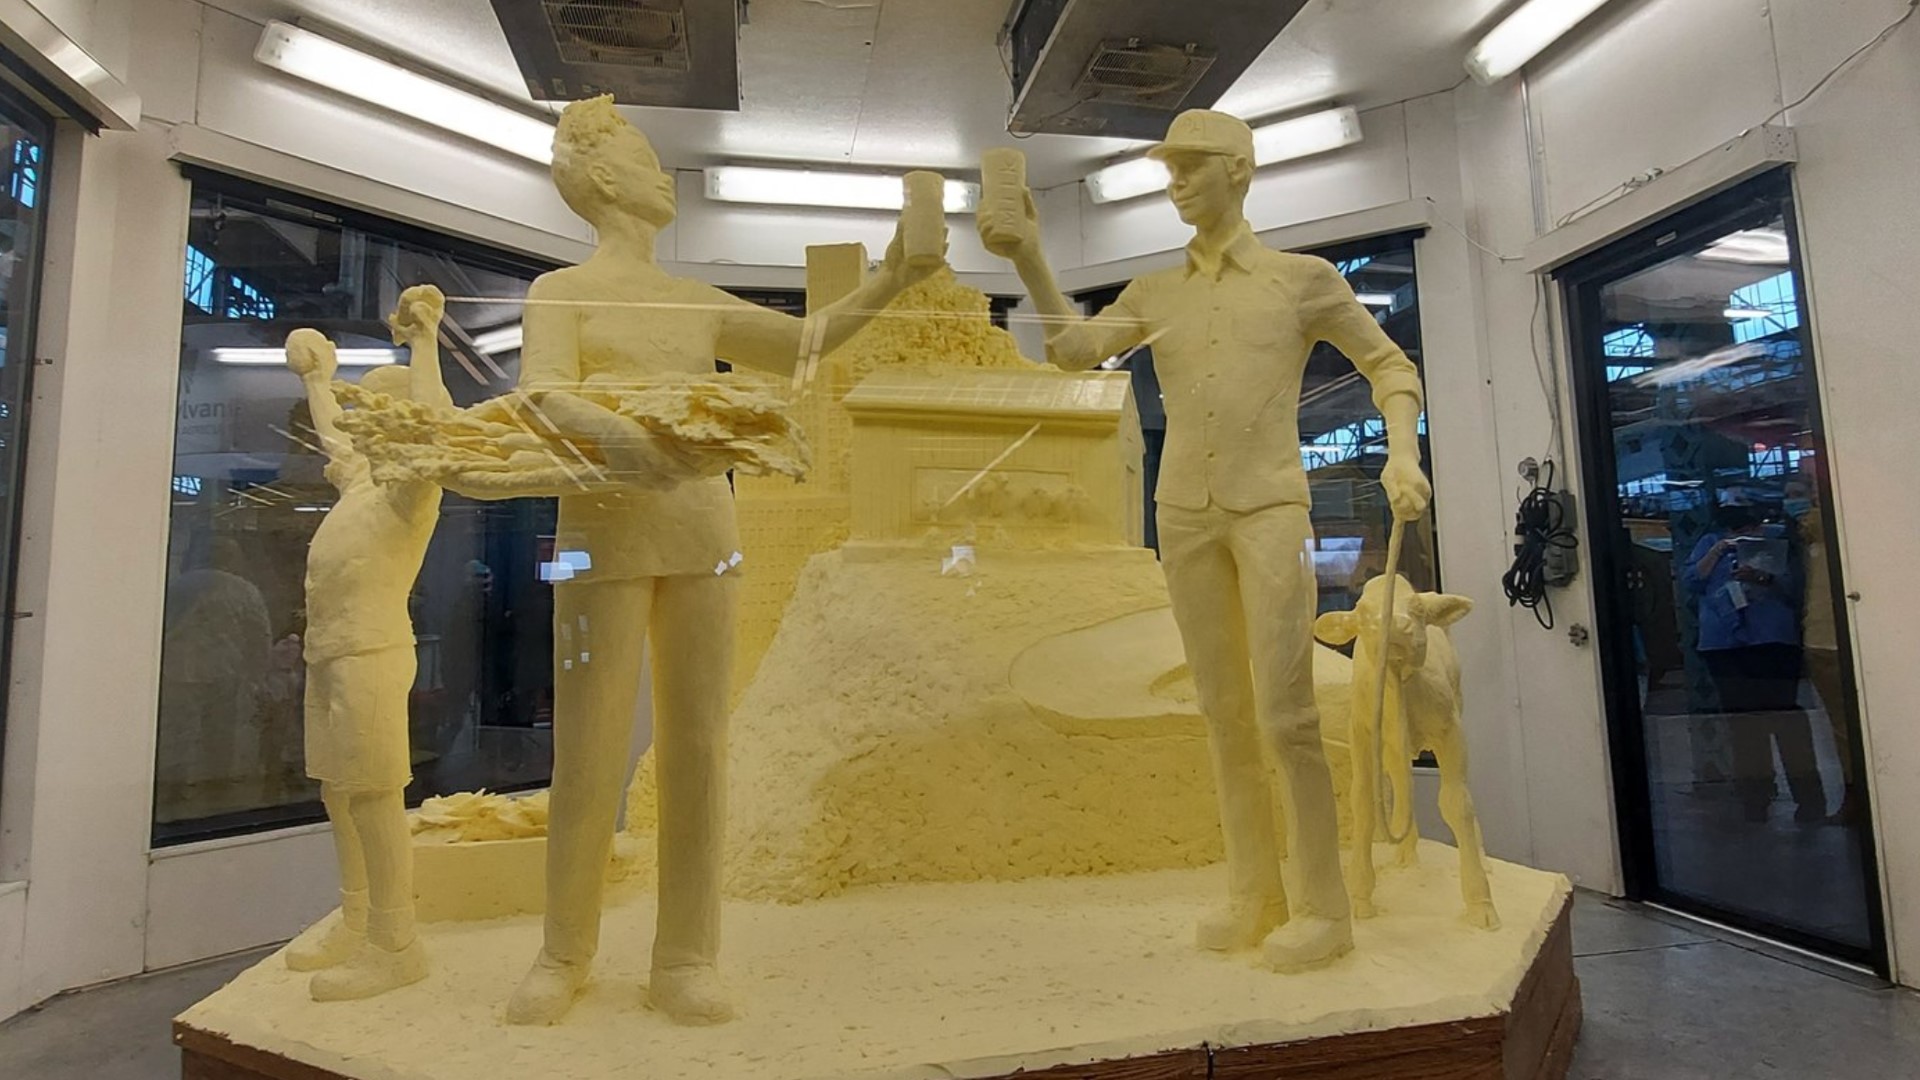 Workers at Reinford Farms say the butter sculpture is estimated to produce enough gas to heat a house for three days.